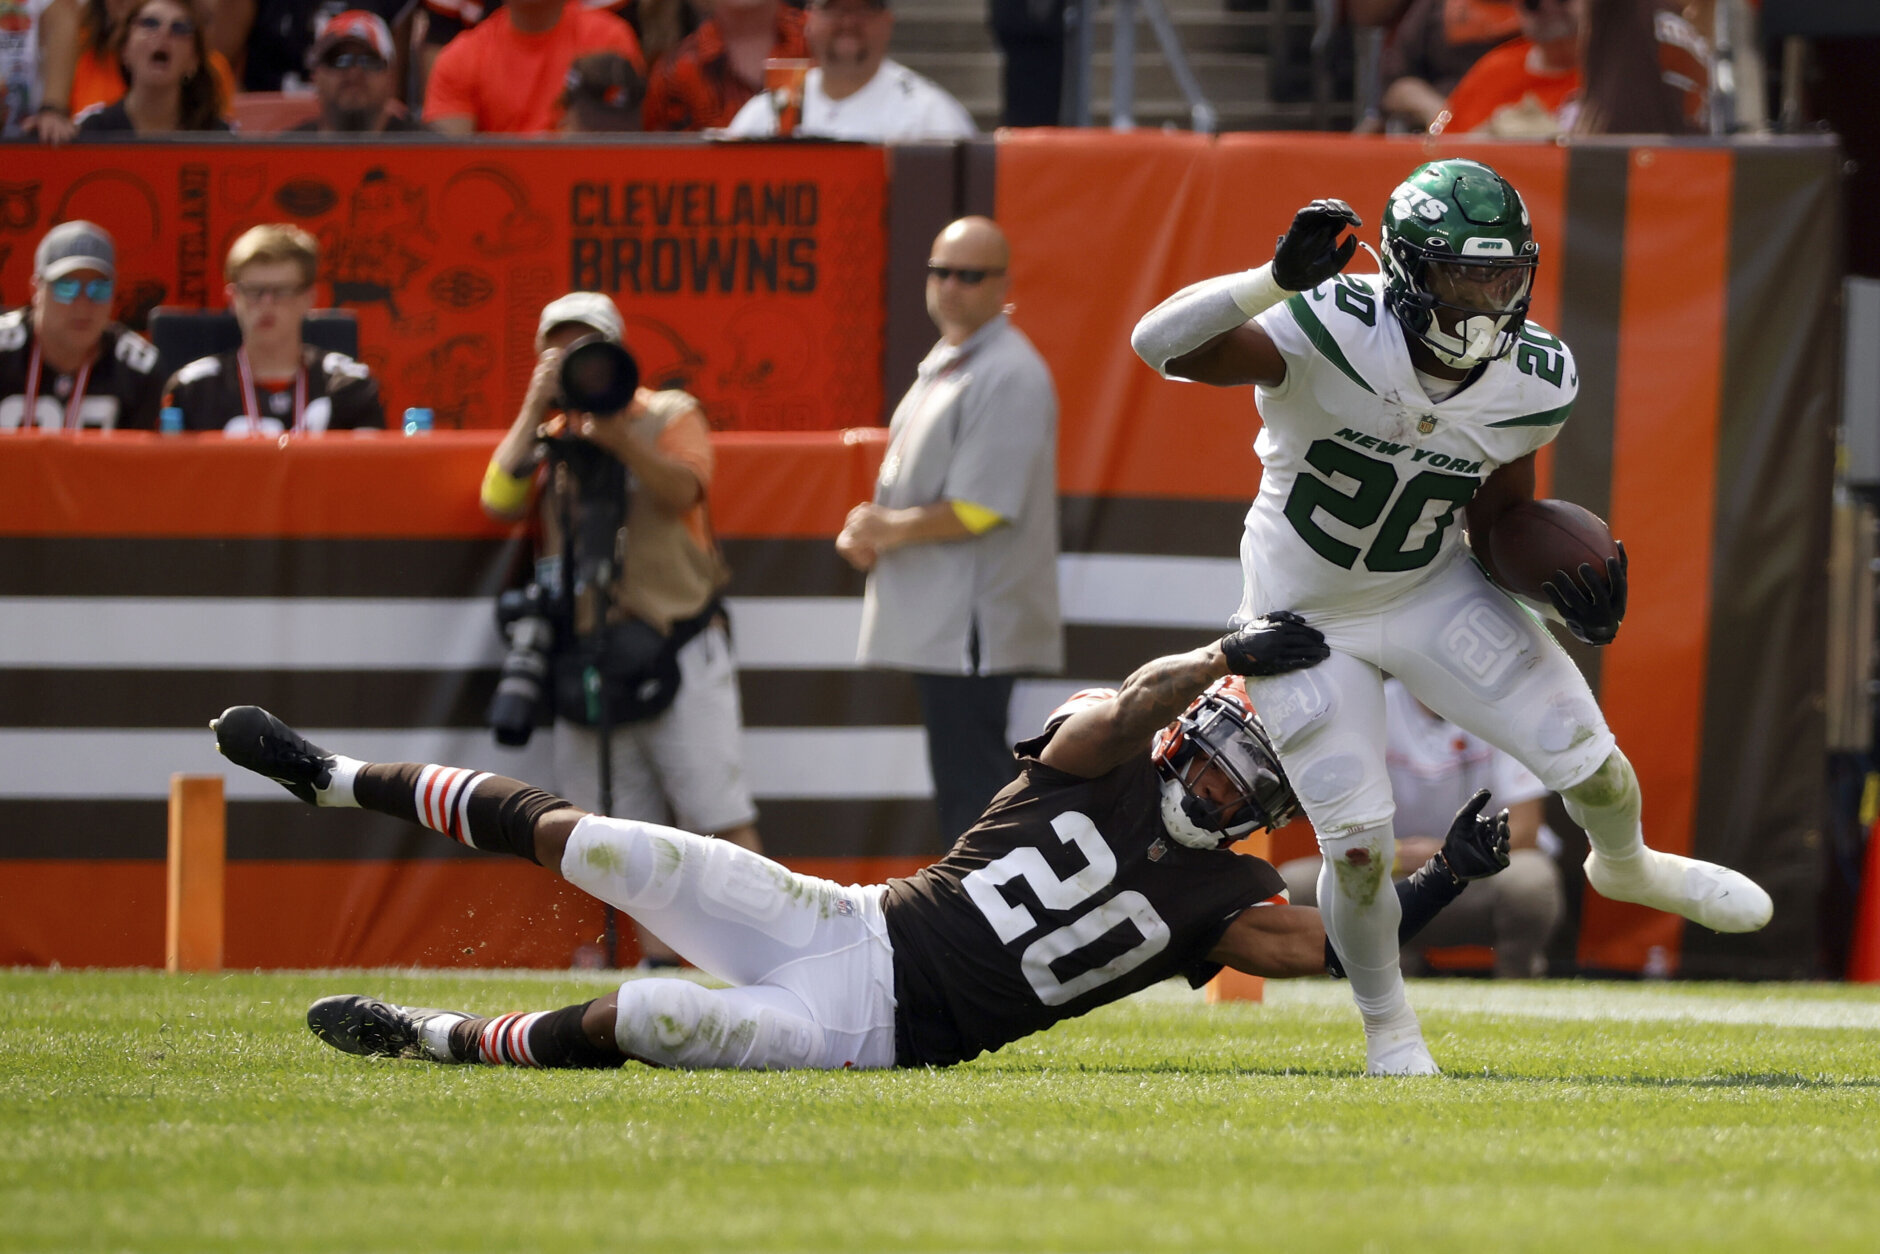 <p><b><i>Jets 31</i></b><br />
<b><i>Browns 30</i></b></p>
<p>Cleveland had its <a href="https://profootballtalk.nbcsports.com/2022/09/14/browns-favored-to-start-2-0-for-first-time-since-1993/" target="_blank" rel="noopener" data-saferedirecturl="https://www.google.com/url?q=https://profootballtalk.nbcsports.com/2022/09/14/browns-favored-to-start-2-0-for-first-time-since-1993/&amp;source=gmail&amp;ust=1663641855998000&amp;usg=AOvVaw2eWiMzLQG0F-yAp6wJ7NXh">first 2-0 start since &#8220;The Curse of Kosar&#8221;</a>  in hand but sullied Brownie the Elf&#8217;s (good?) name with <a href="https://twitter.com/ESPNStatsInfo/status/1571613190664105984?s=20&amp;t=w5EibHOCHOYEHmkiQXok_g" target="_blank" rel="noopener" data-saferedirecturl="https://www.google.com/url?q=https://twitter.com/ESPNStatsInfo/status/1571613190664105984?s%3D20%26t%3Dw5EibHOCHOYEHmkiQXok_g&amp;source=gmail&amp;ust=1663641855998000&amp;usg=AOvVaw1syNtHnYp4UXaCUF6ebG2u">one of the greatest choke jobs we&#8217;ve seen since … the Browns</a>. <a href="https://www.youtube.com/watch?v=tRBDMMVctu8" target="_blank" rel="noopener" data-saferedirecturl="https://www.google.com/url?q=https://www.youtube.com/watch?v%3DtRBDMMVctu8&amp;source=gmail&amp;ust=1663641855998000&amp;usg=AOvVaw1toQIlwPKPE5qDxG4yGd-w">The Factory of Sadness</a> is printing more misery while <a href="https://twitter.com/TMKSESPN/status/1569414301886078978" target="_blank" rel="noopener" data-saferedirecturl="https://www.google.com/url?q=https://twitter.com/TMKSESPN/status/1569414301886078978&amp;source=gmail&amp;ust=1663641855998000&amp;usg=AOvVaw1TECPFEOYt44BW-dPOcwq6">the Jets might be printing receipts</a> sooner than we think.</p>
